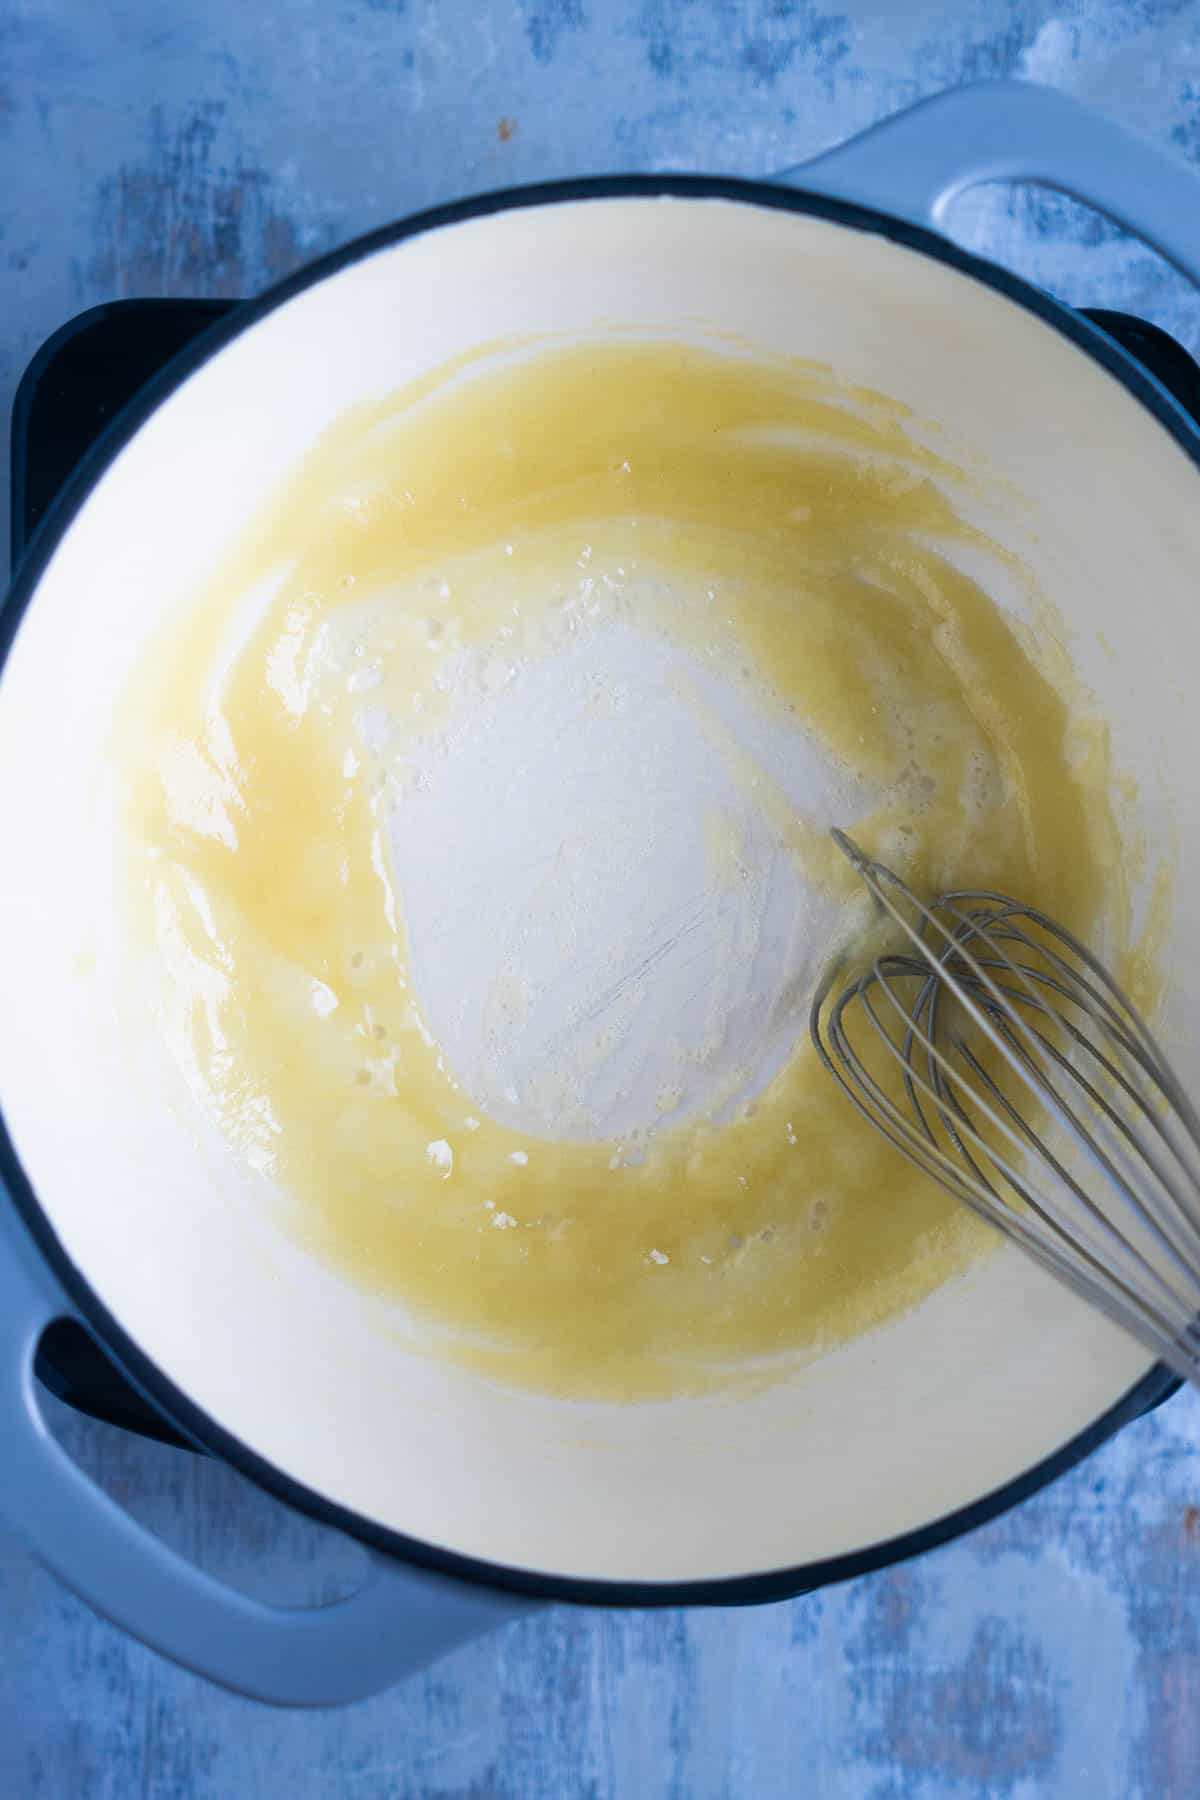 whisk stirs roux in saucepan